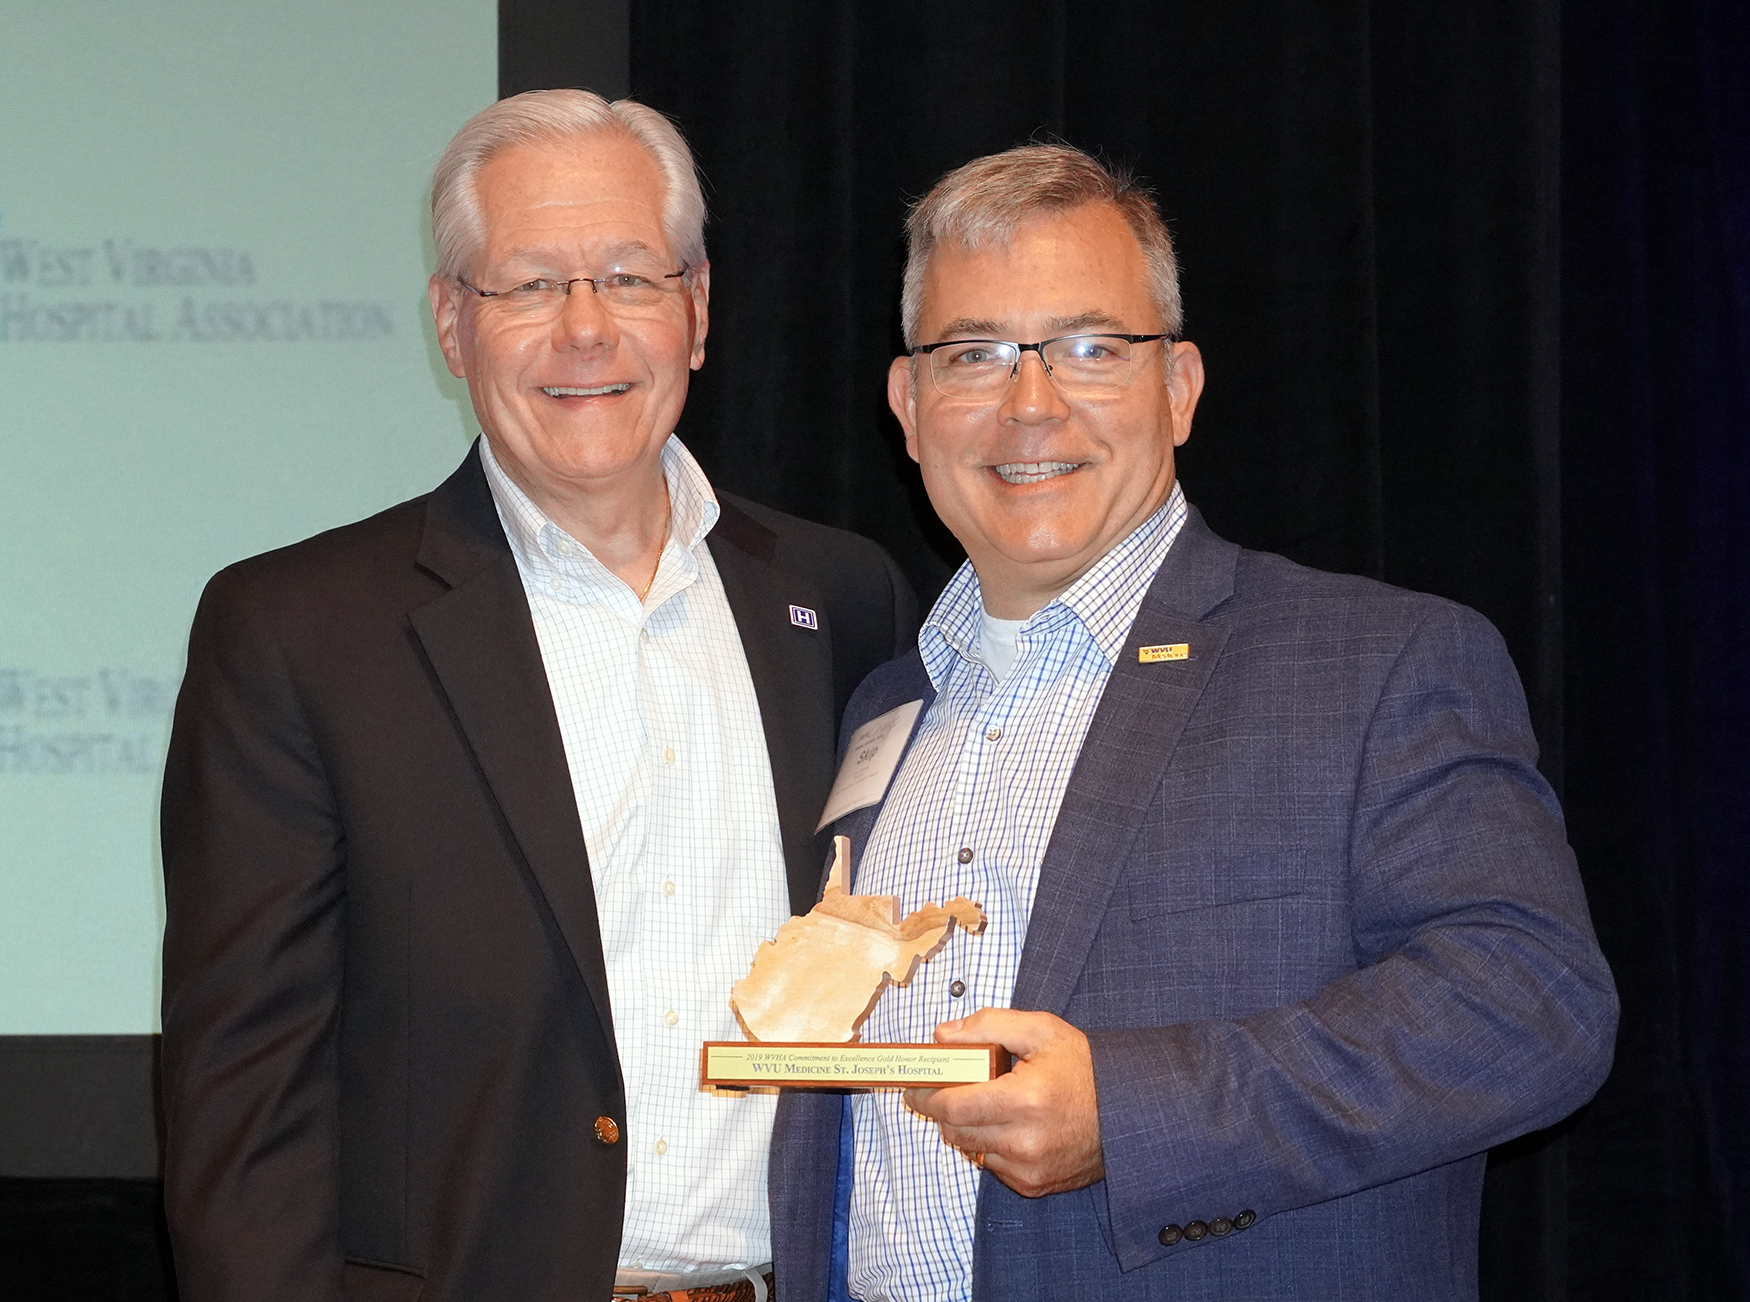 (From left to right) Joe Letnaunchyn, president and CEO of the West Virginia Hospital Association, presents Skip Gjolberg, president of WVU Medicine St. Joseph's Hospital, with the Gold Honors Achievement Award.